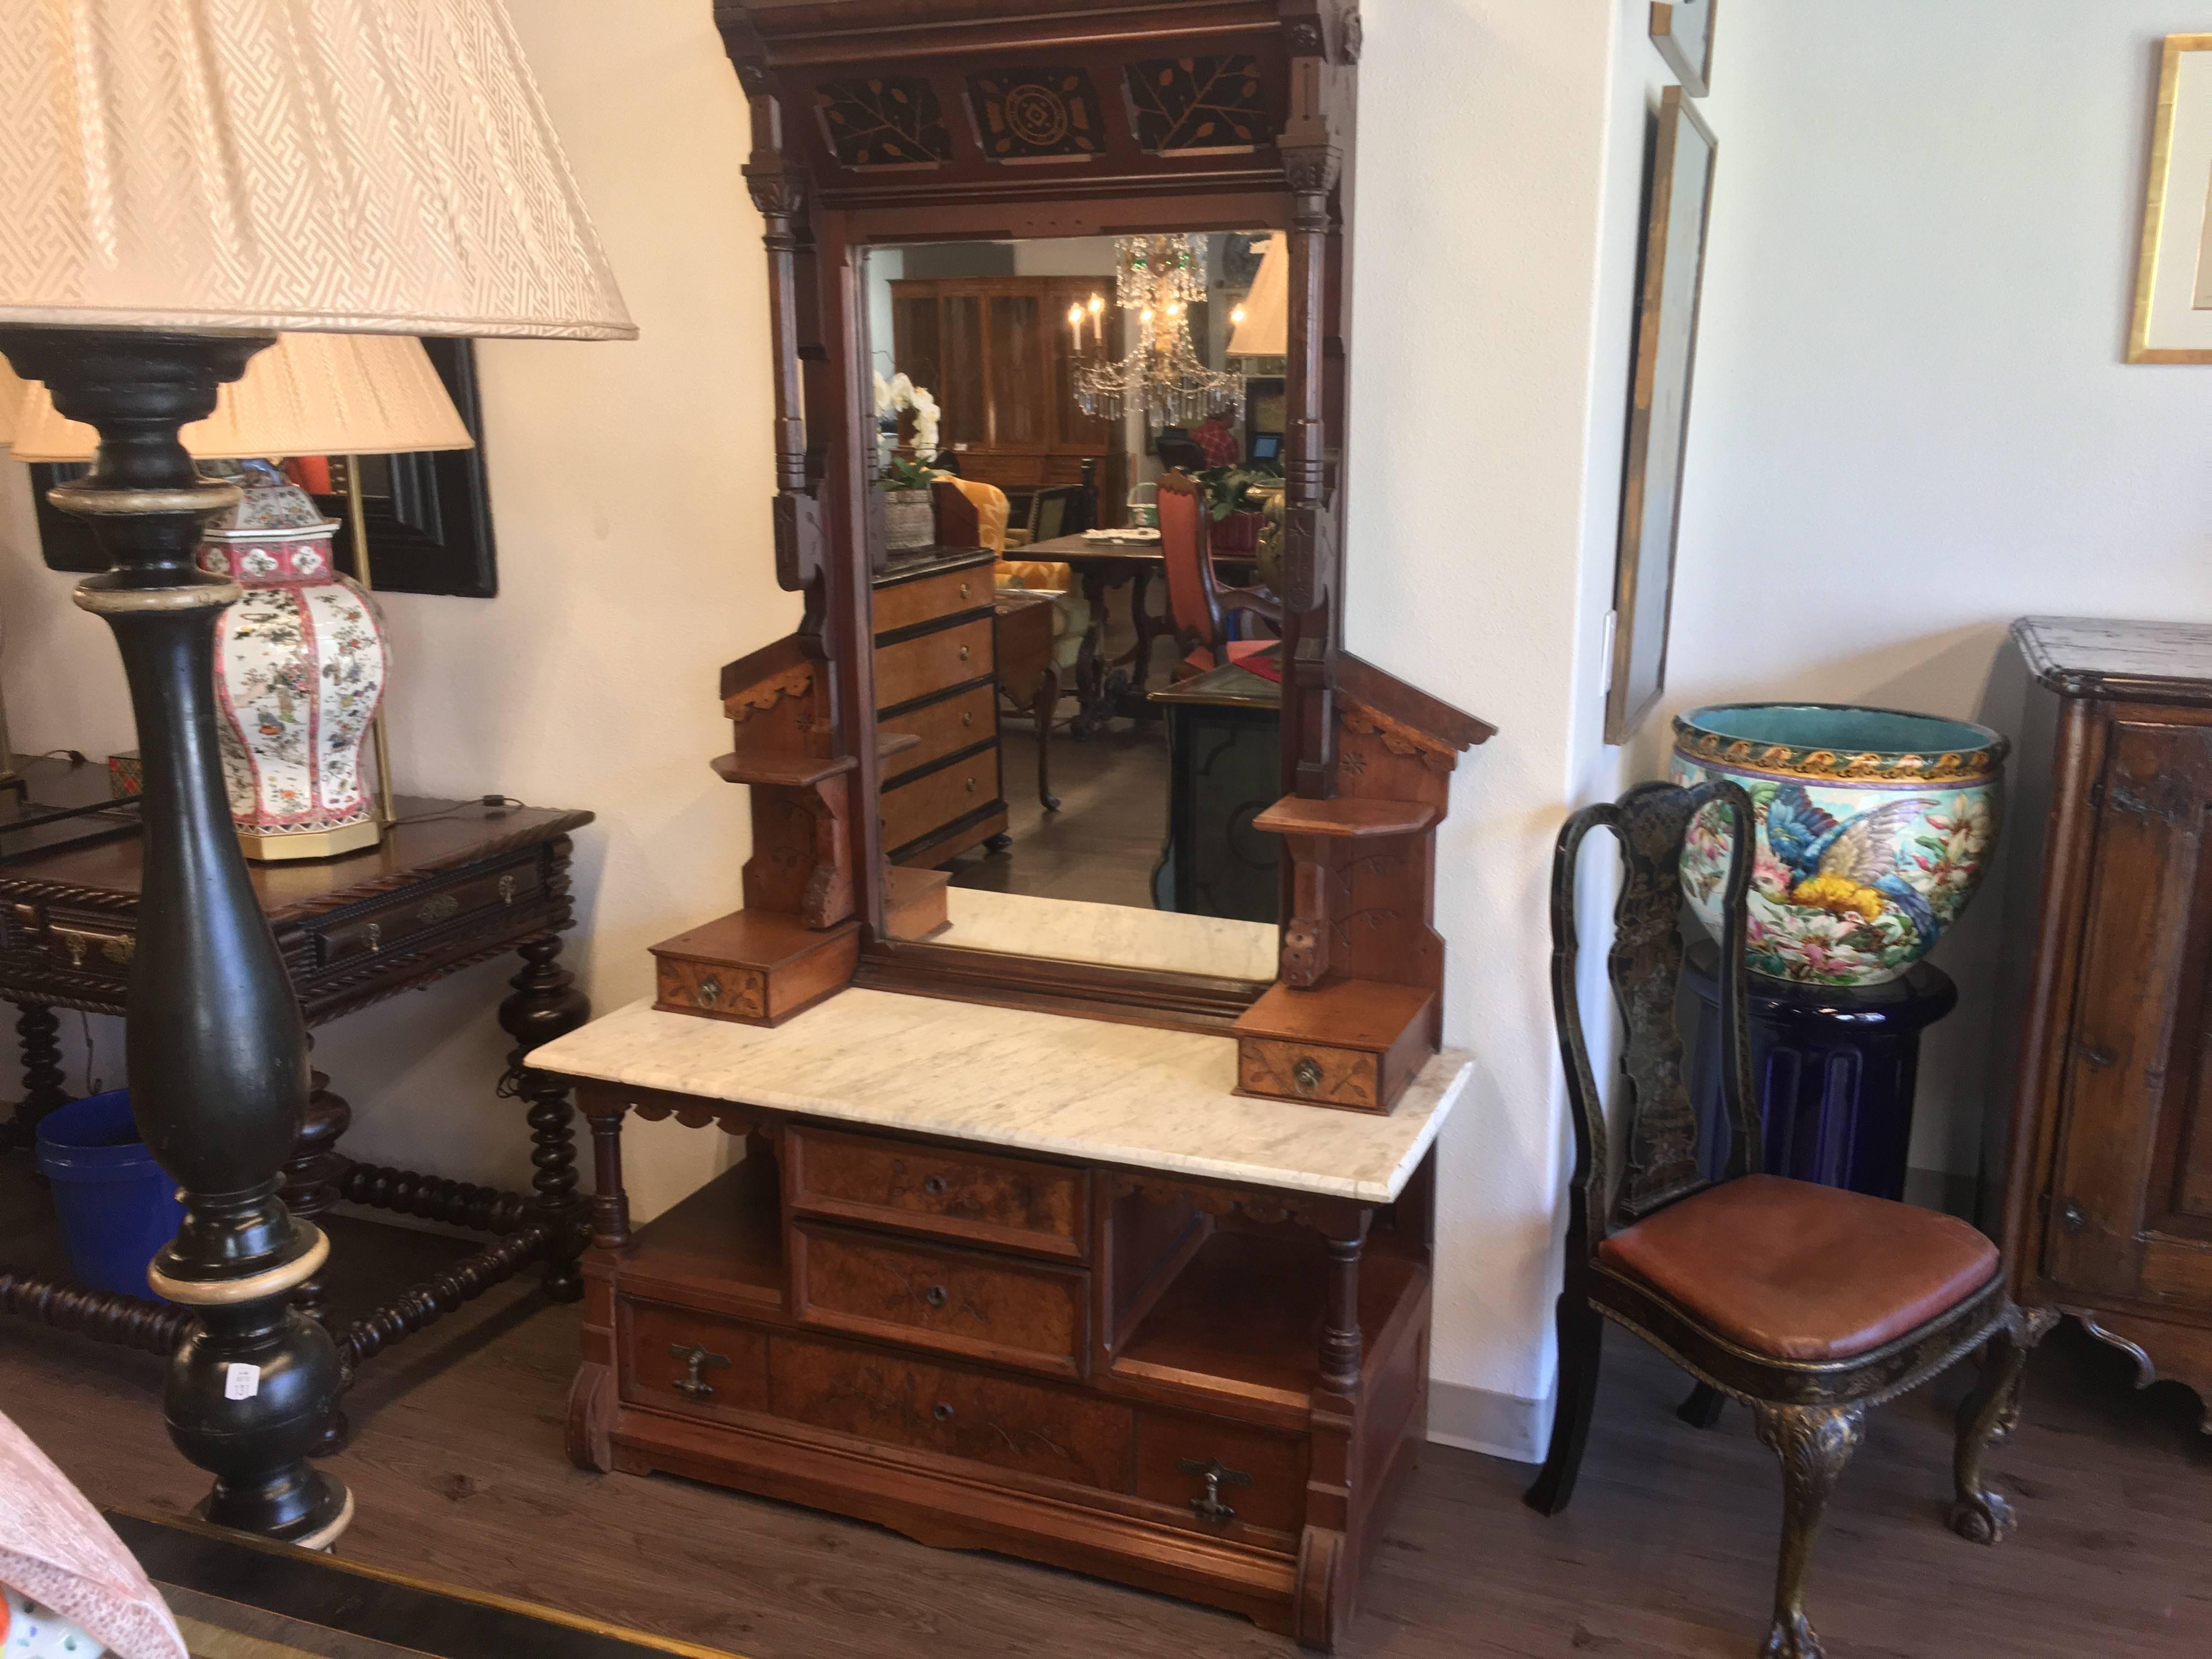 Late 19th century hand-carved walnut and rosewood Victorian Aesthetic Movement gentleman's dressing mirror with bianco venatino marble top. This piece stylishly epitomizes the transitional mid-19th century Eastlake sensibility to the more simpler,